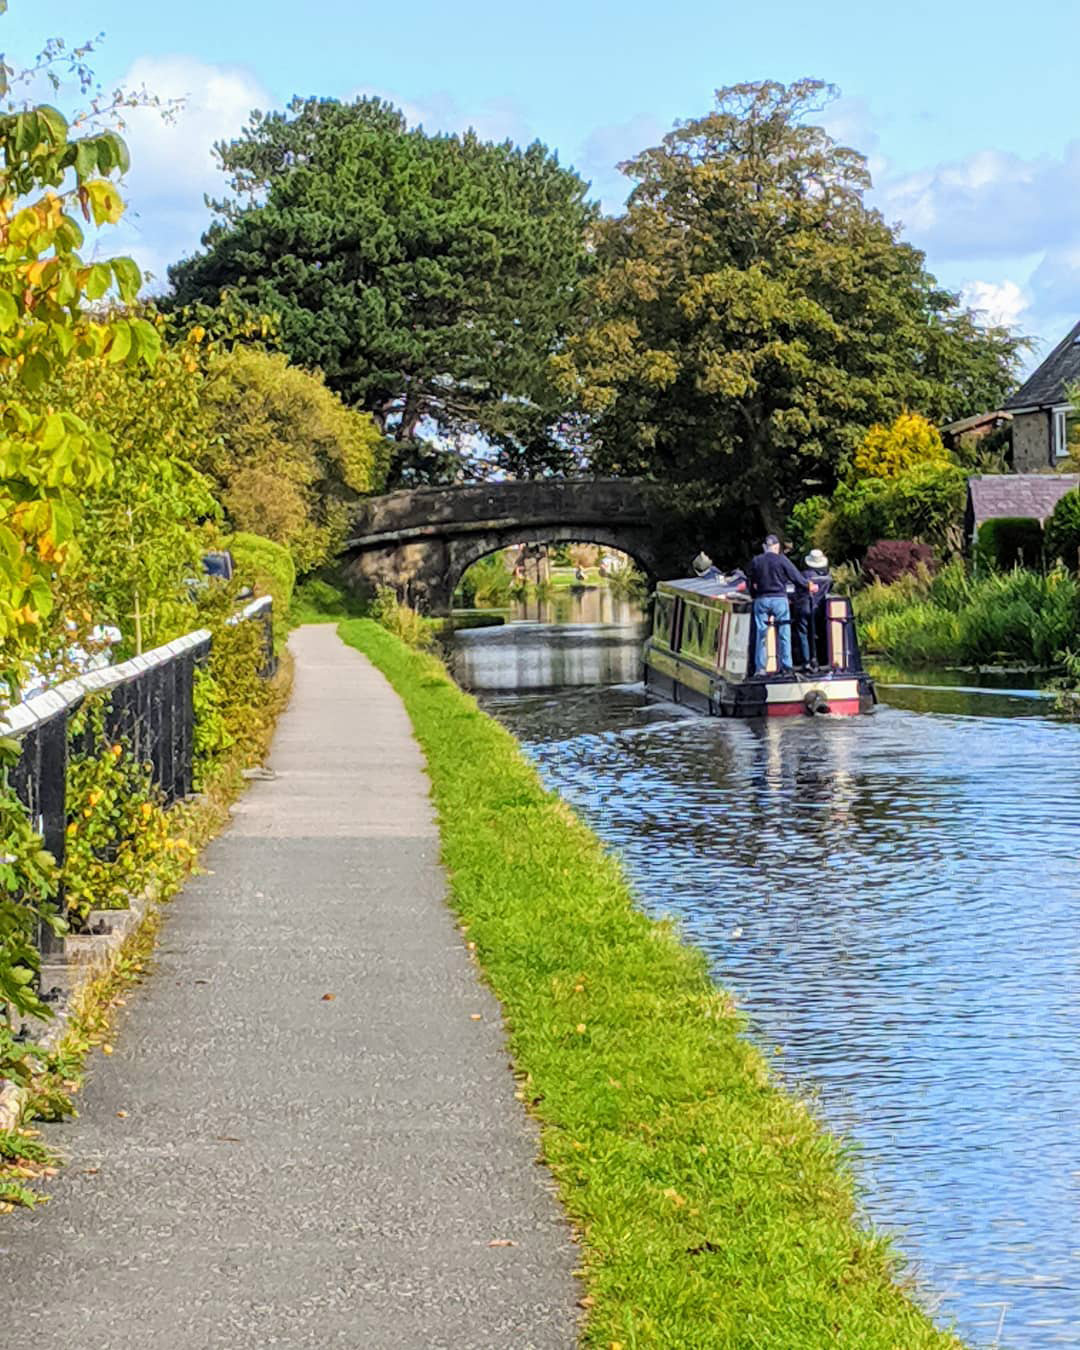 Cruise down the Lancaster canal in a narrowboat during summer for a relaxing and scenic holiday.